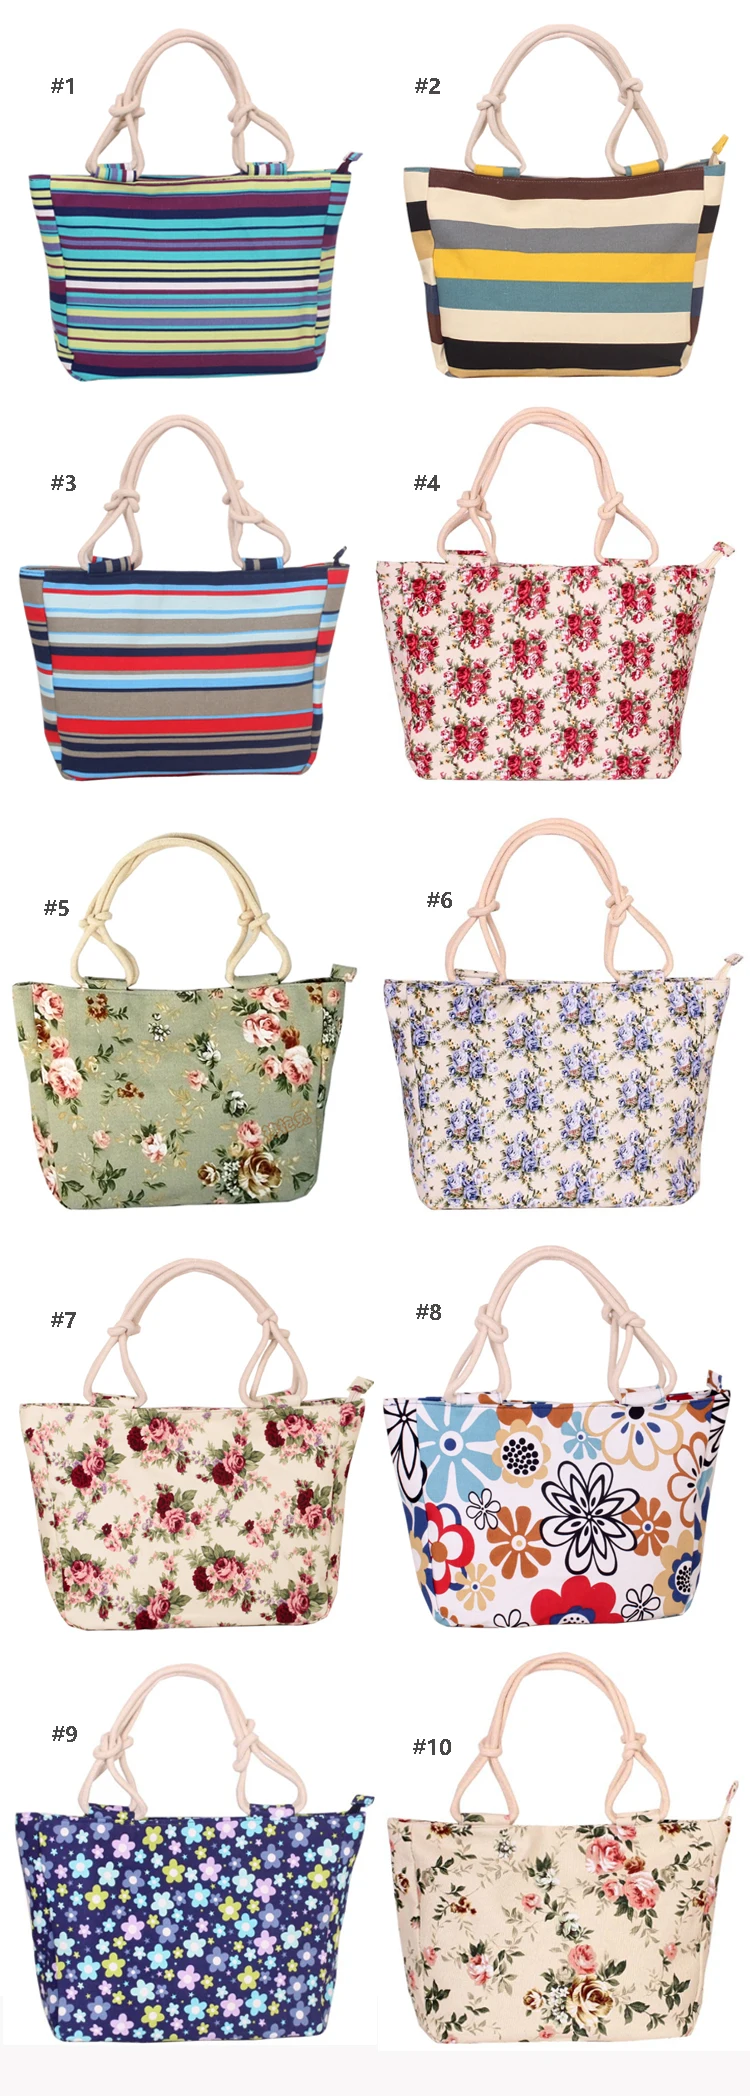 Osgoodway2 Wholesale Eco Floral Print Canvas Bags Handbag Women Large Canvas Tote Bag with Zipper